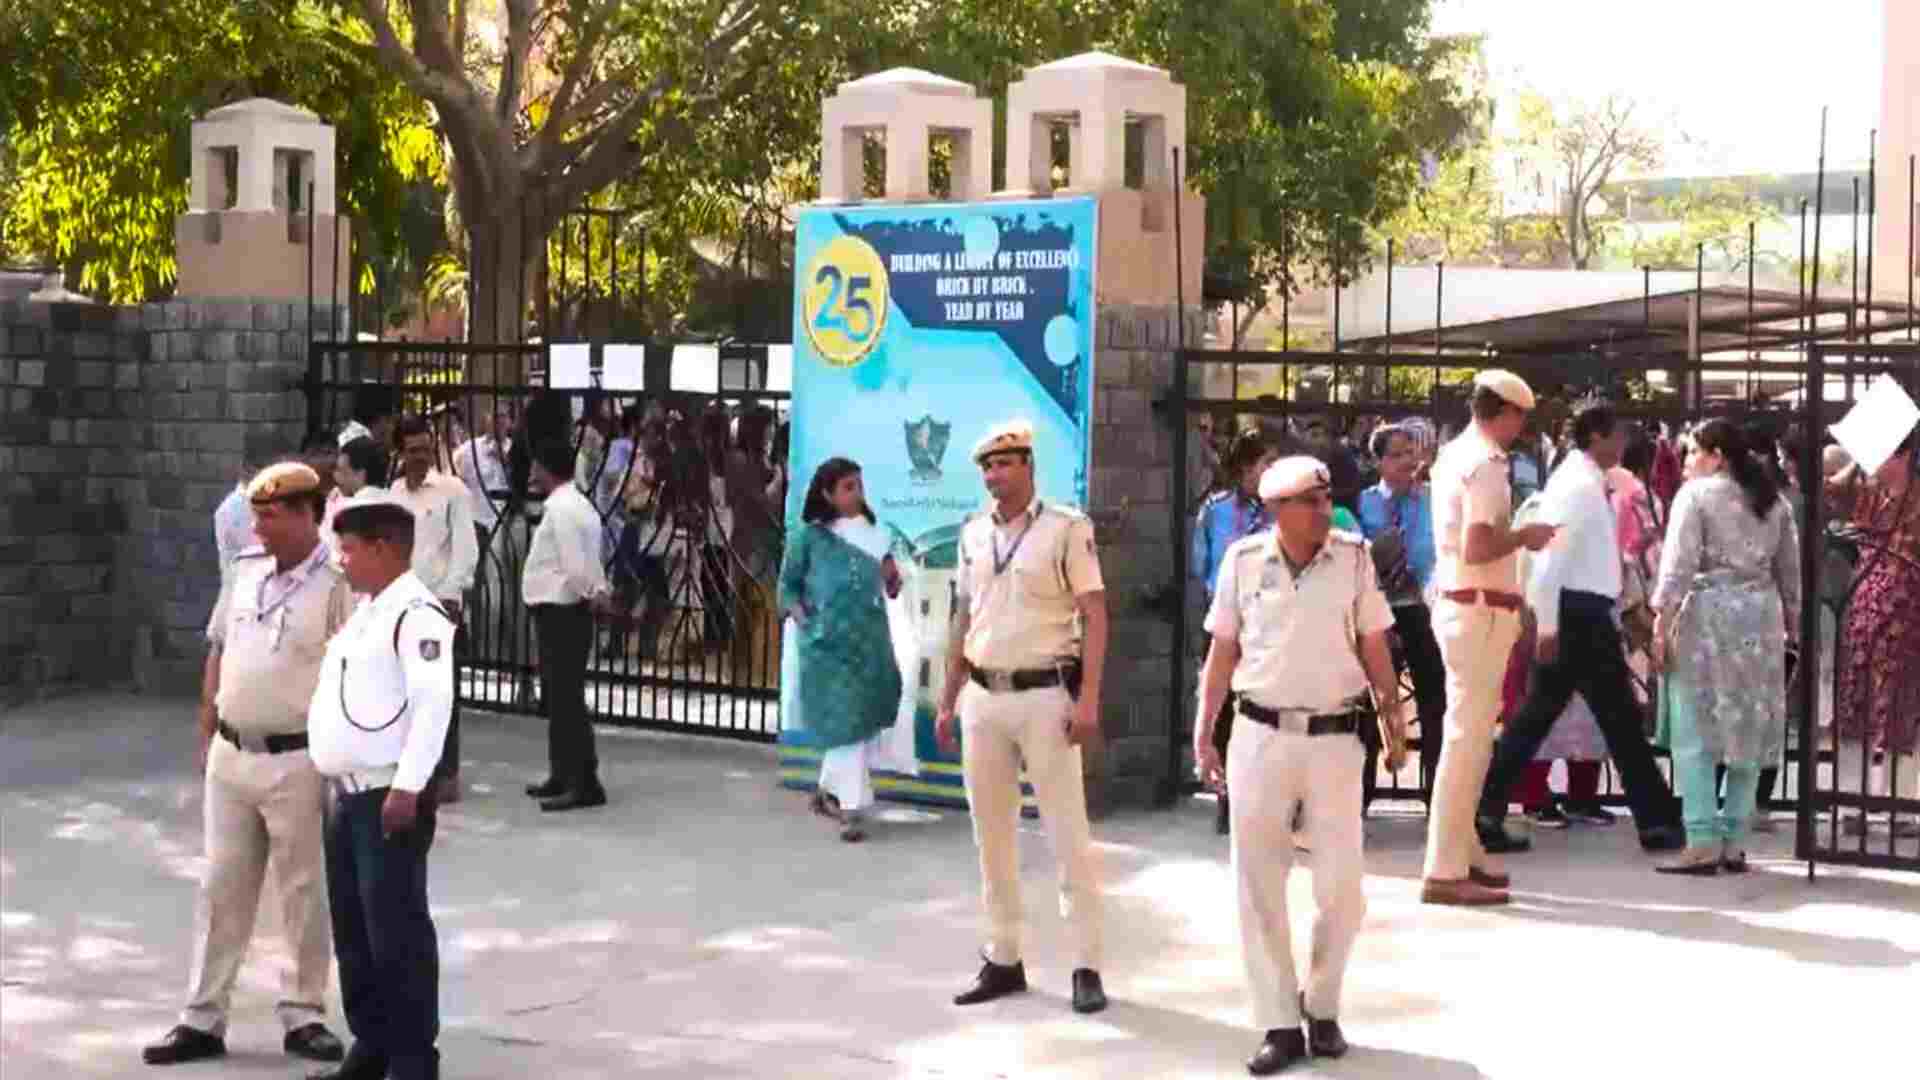 Delhi Schools Bomb Threat: Police Urges People Not To Believe On Fake News Amid Ongoing Investigation